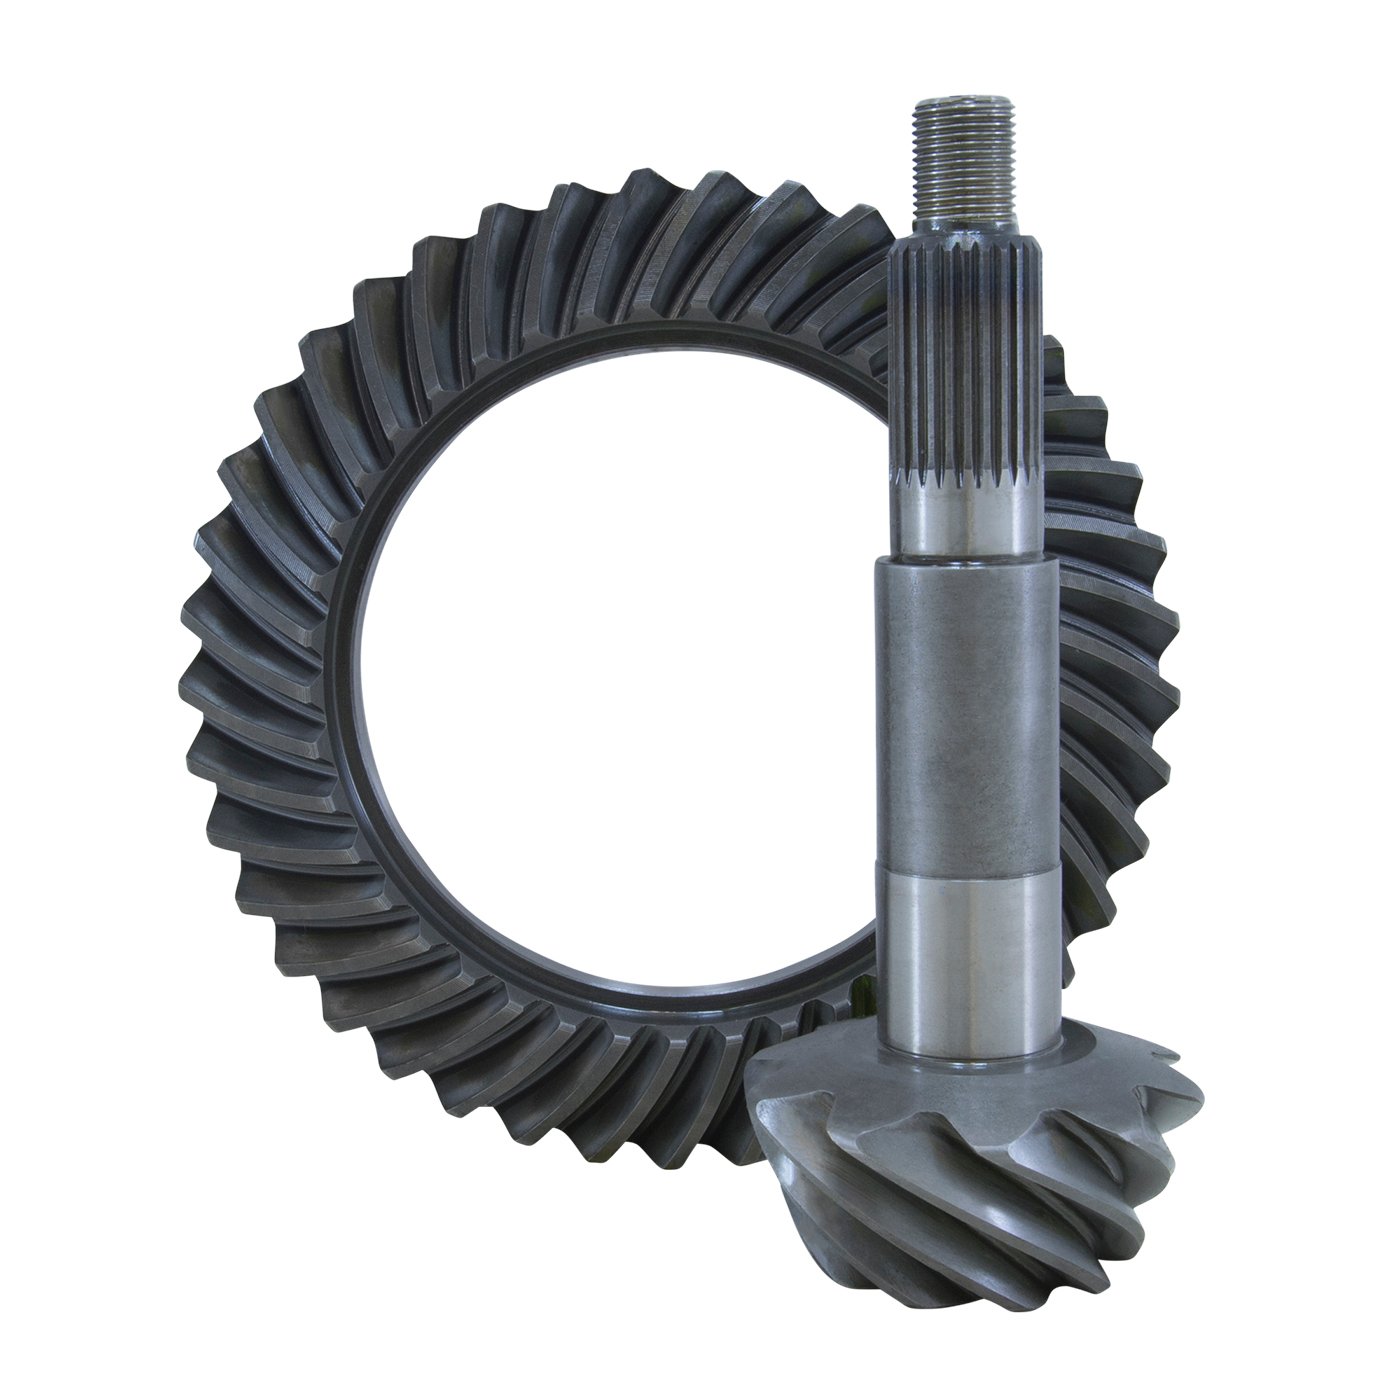 USA Standard ZG D44-411 Replacement Ring & Pinion Gear Set, For Dana 44, 4.11 Ratio